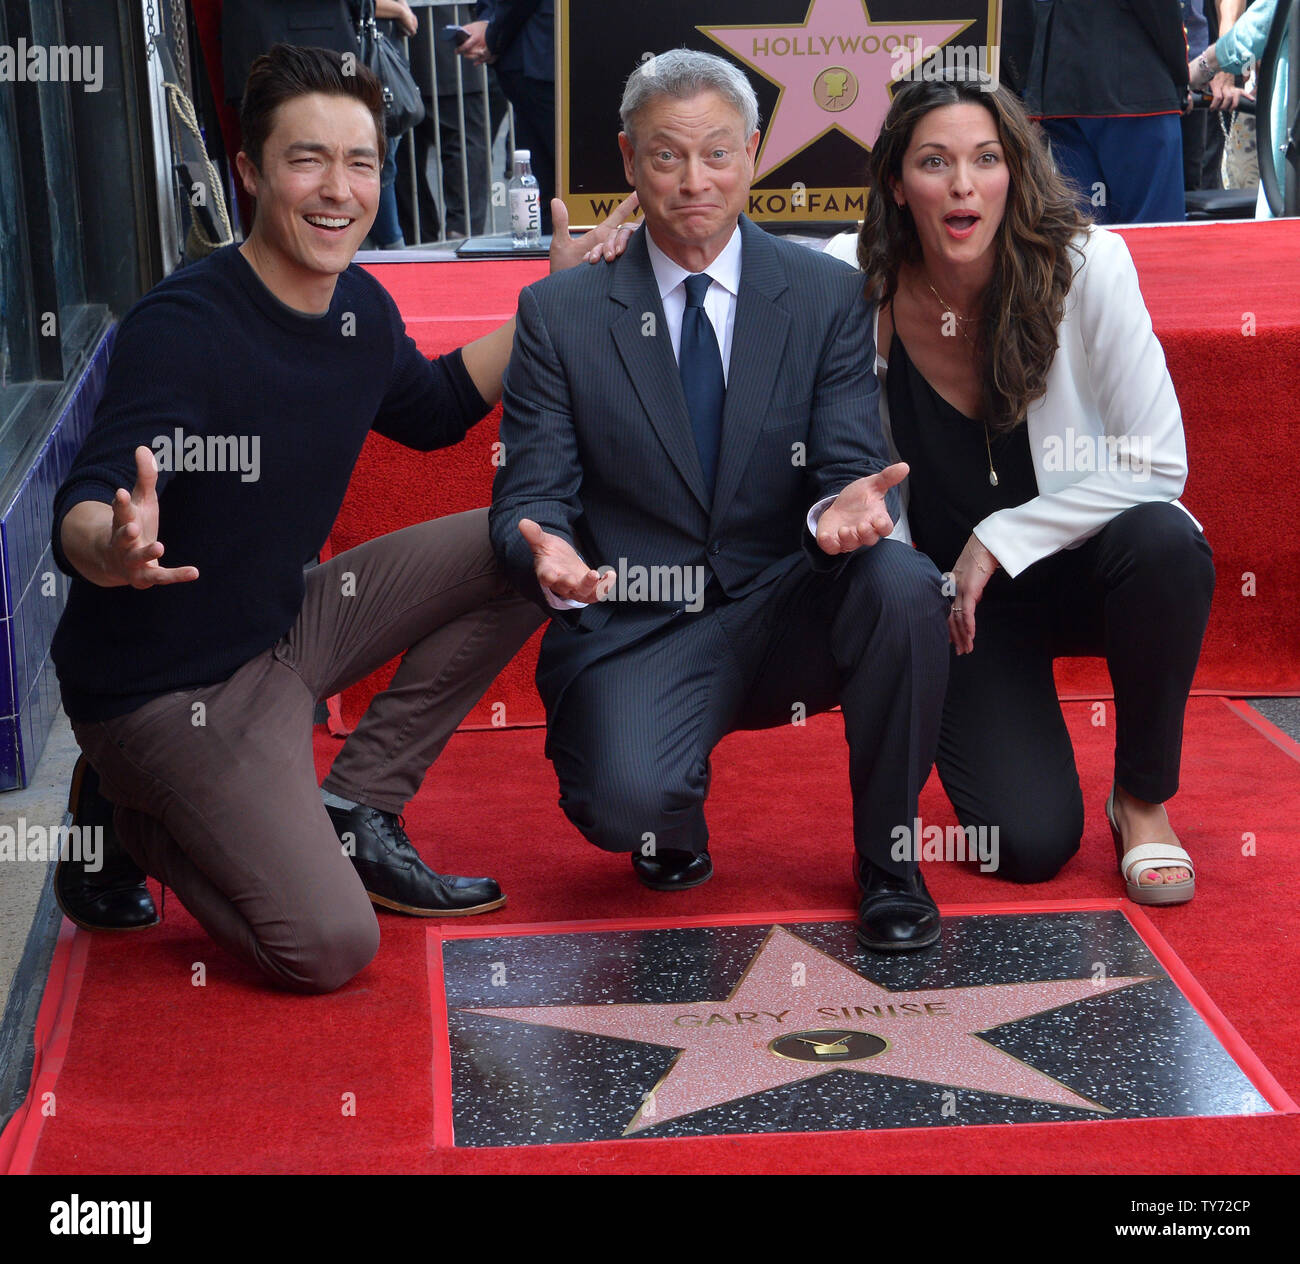 Actor and director Gary Sinise (C) is joined by actors Daniel Henney (L) and Alana de la Garza during an unveiling ceremony honoring him with the 2,606th star on the Hollywood Walk of Fame in Los Angeles on April 17, 2017.  Photo by Jim Ruymen/UPI Stock Photo